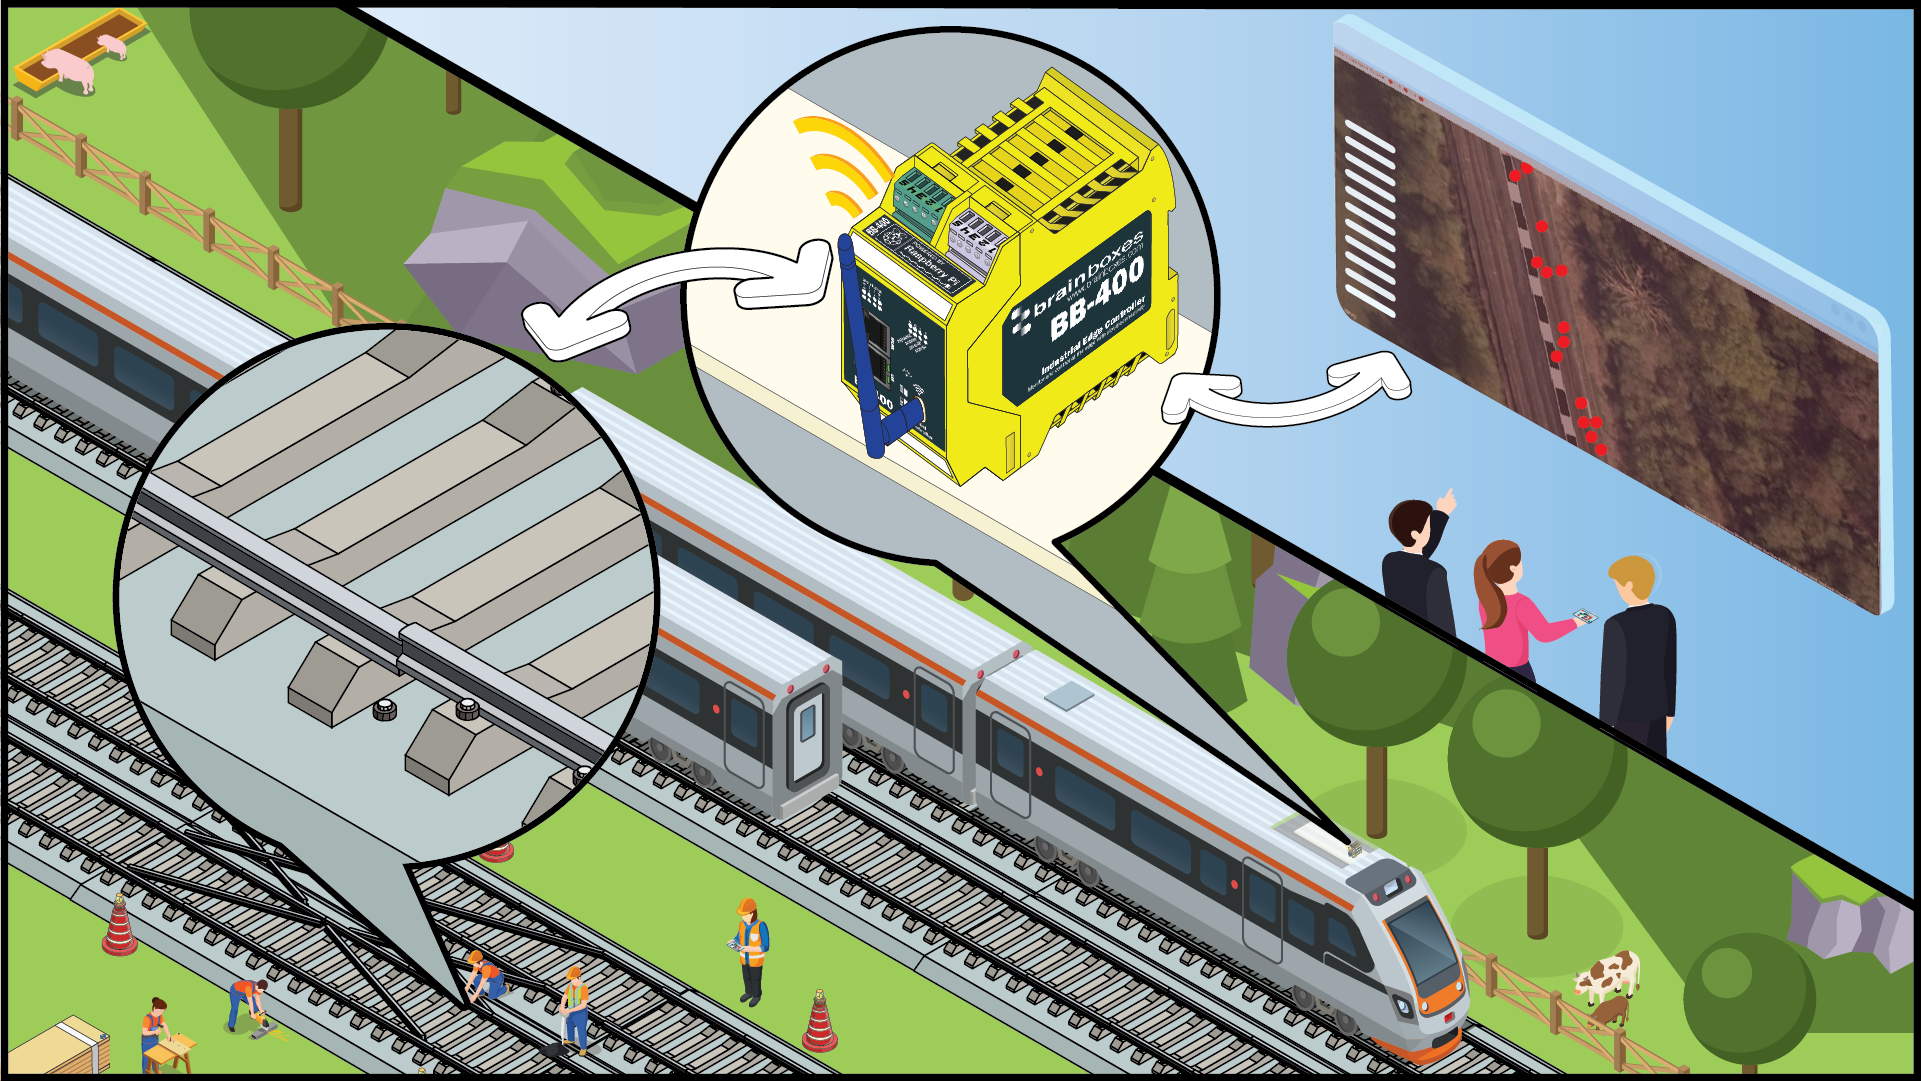 graphic detailing Brainboxes BB-400 industrial edge controller sending data from Govia Thameslink trains to head office